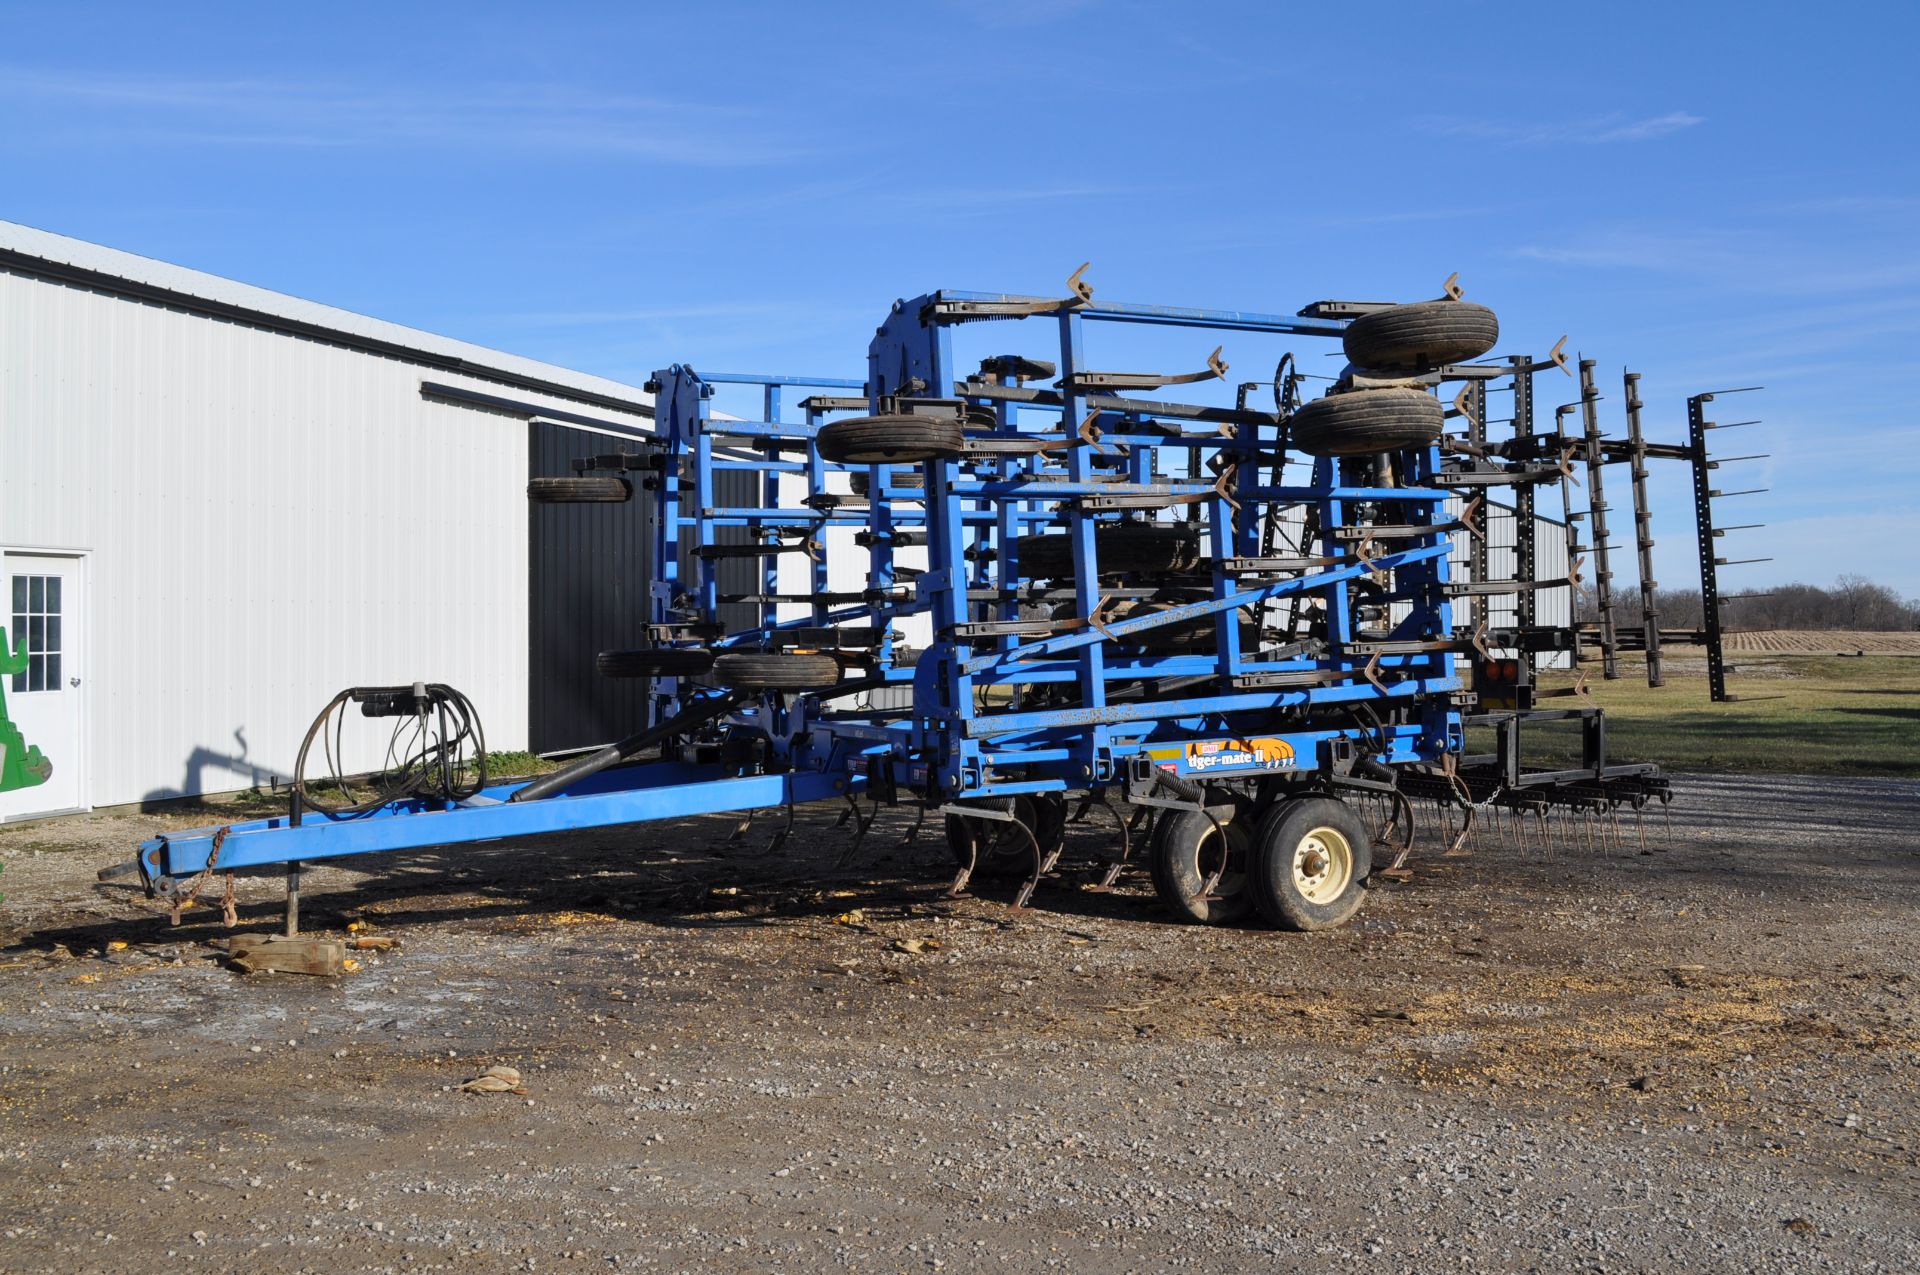 41’ DMI Tiger Mate II field cultivator, dble hyd fold, walking tandems, rear hitch, 4 bar spring - Image 21 of 21